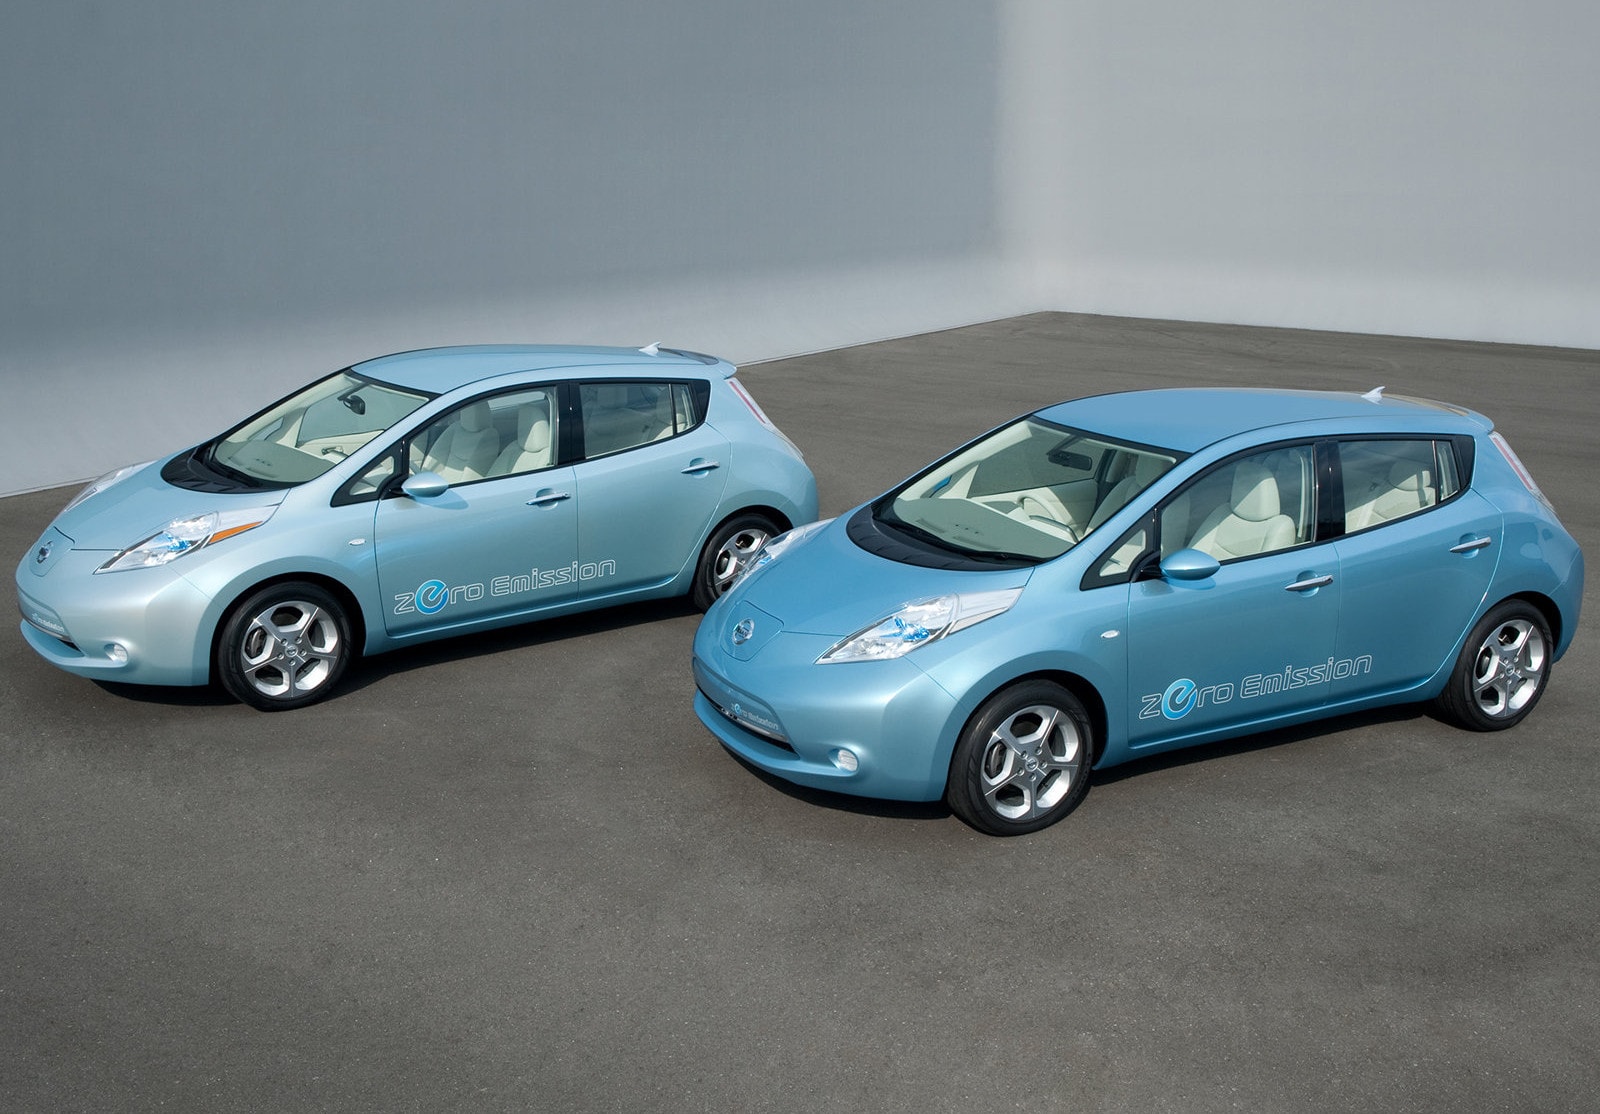 Chevy volt and nissan leaf #1